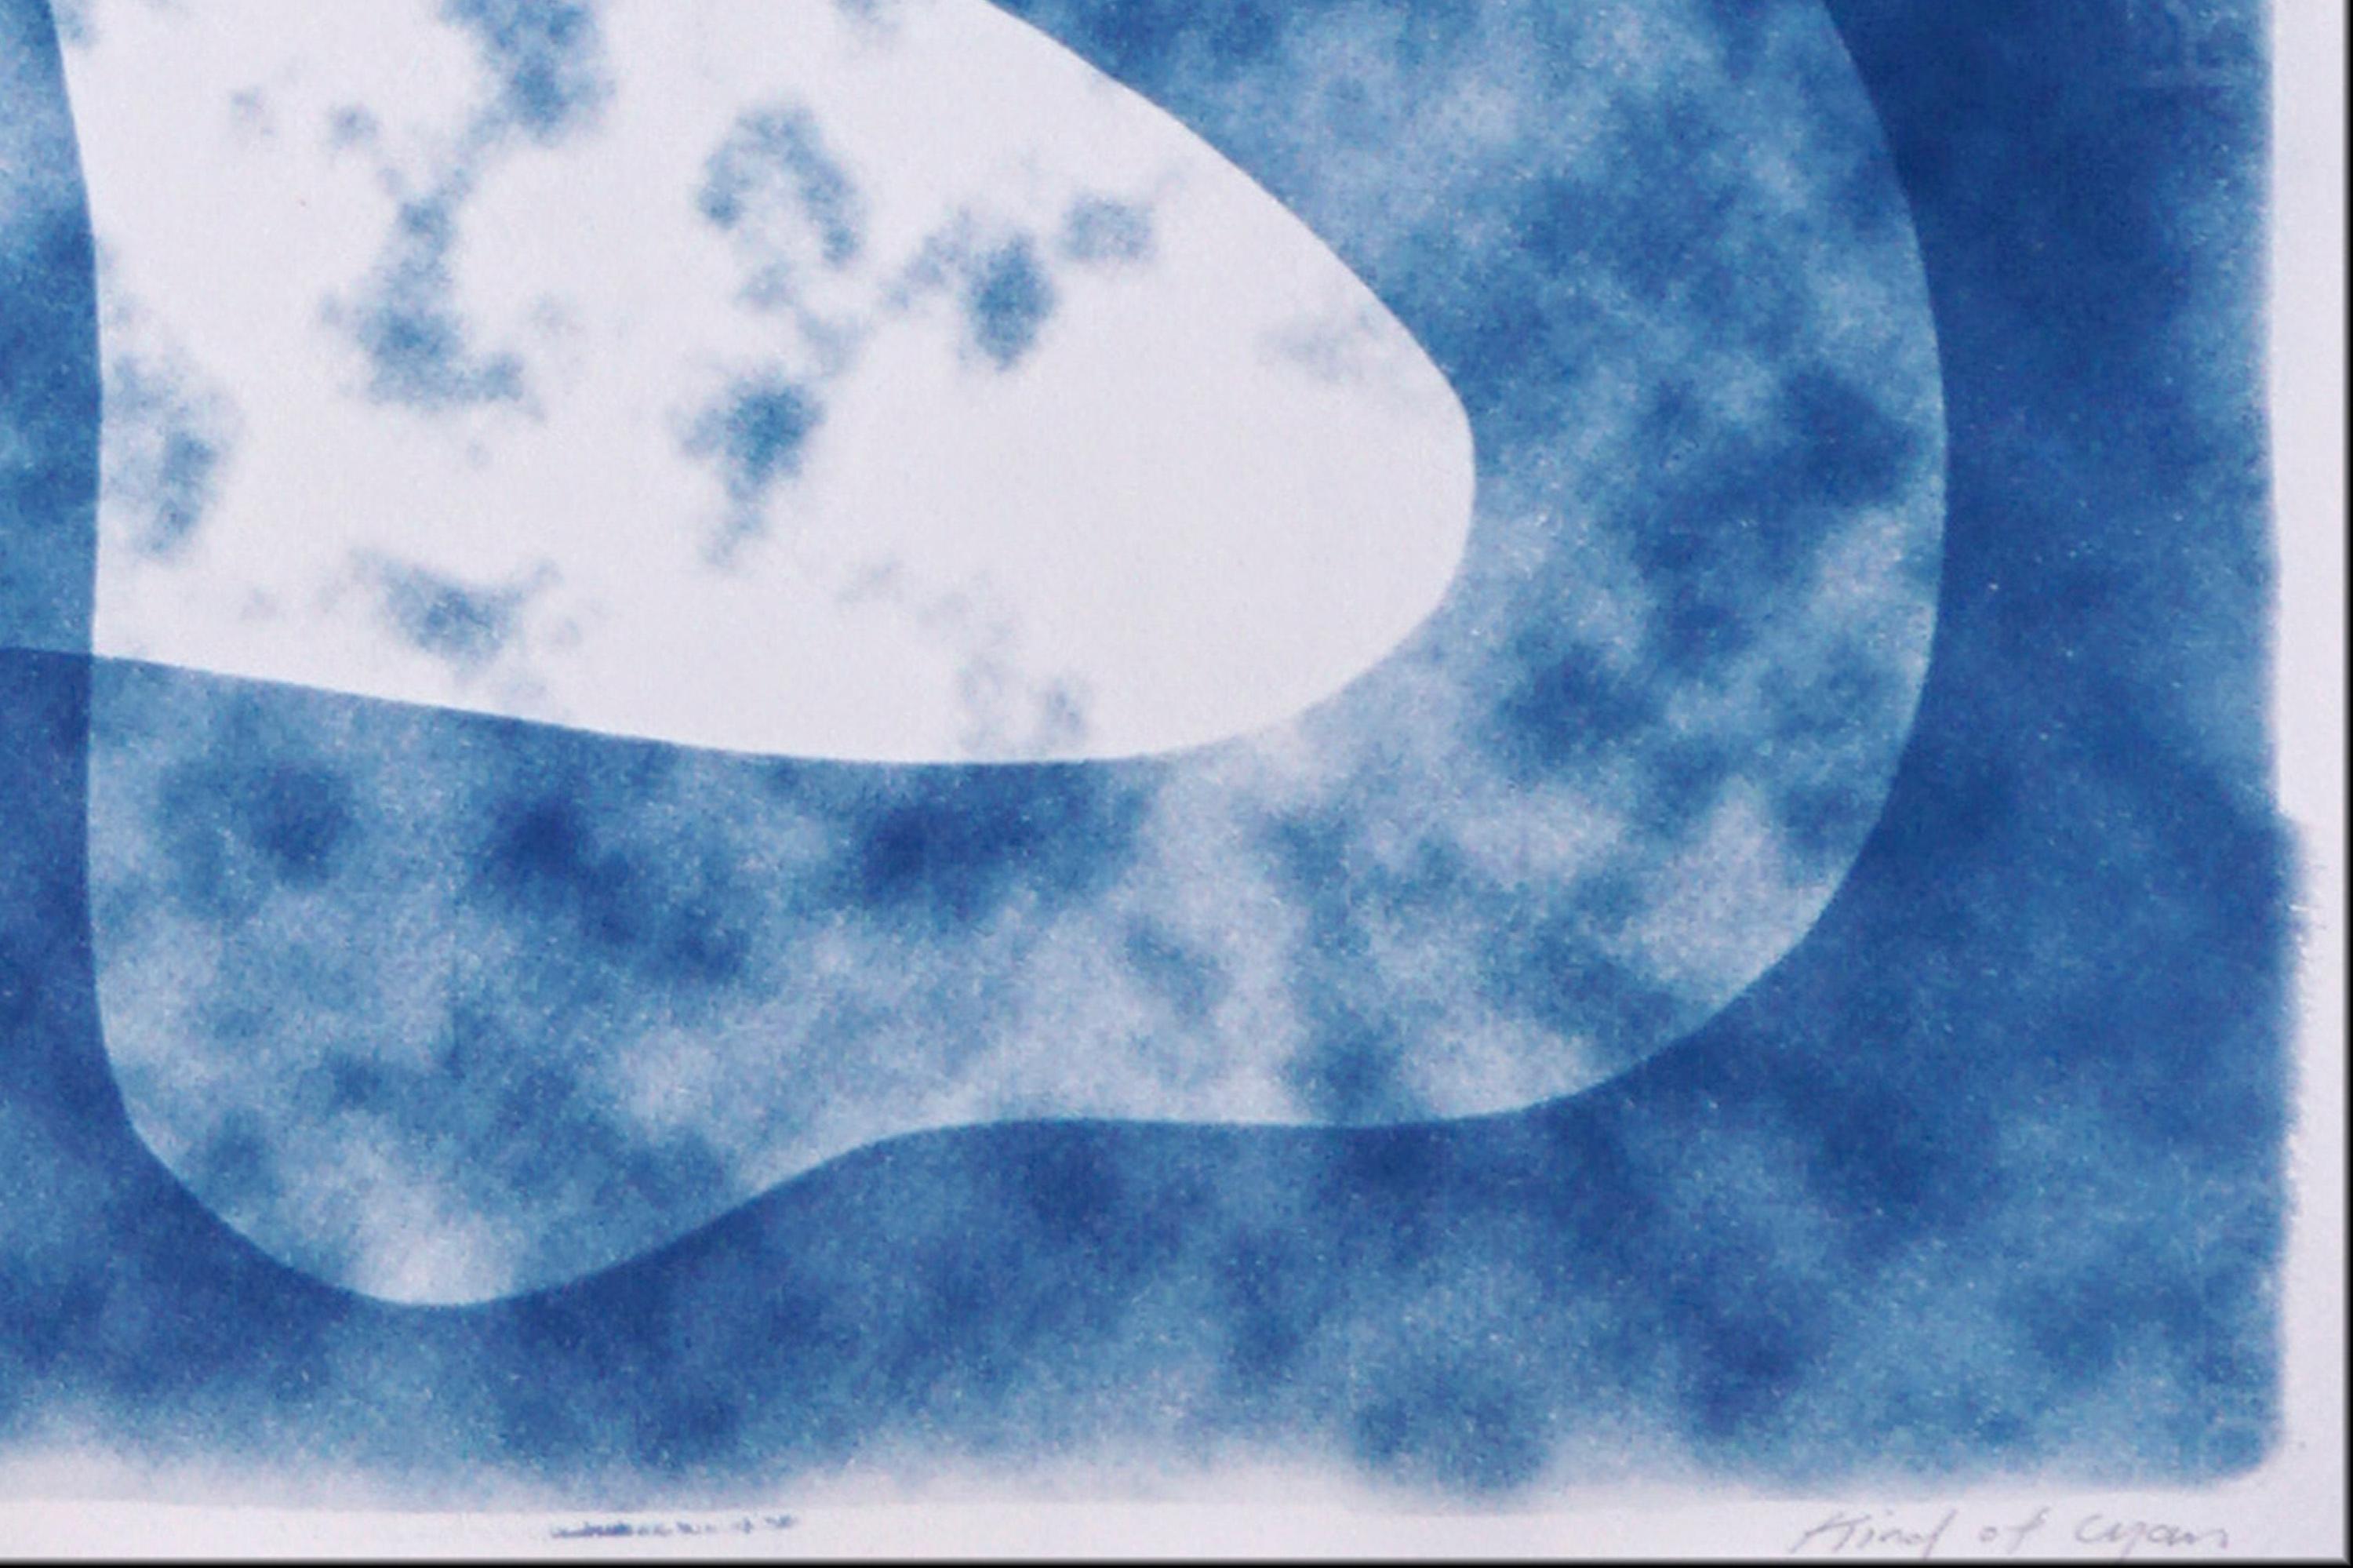 Dark Cloudy Shapes, Mid-Century Modern Kidney Forms, Blue and White Transparency - Abstract Photograph by Kind of Cyan